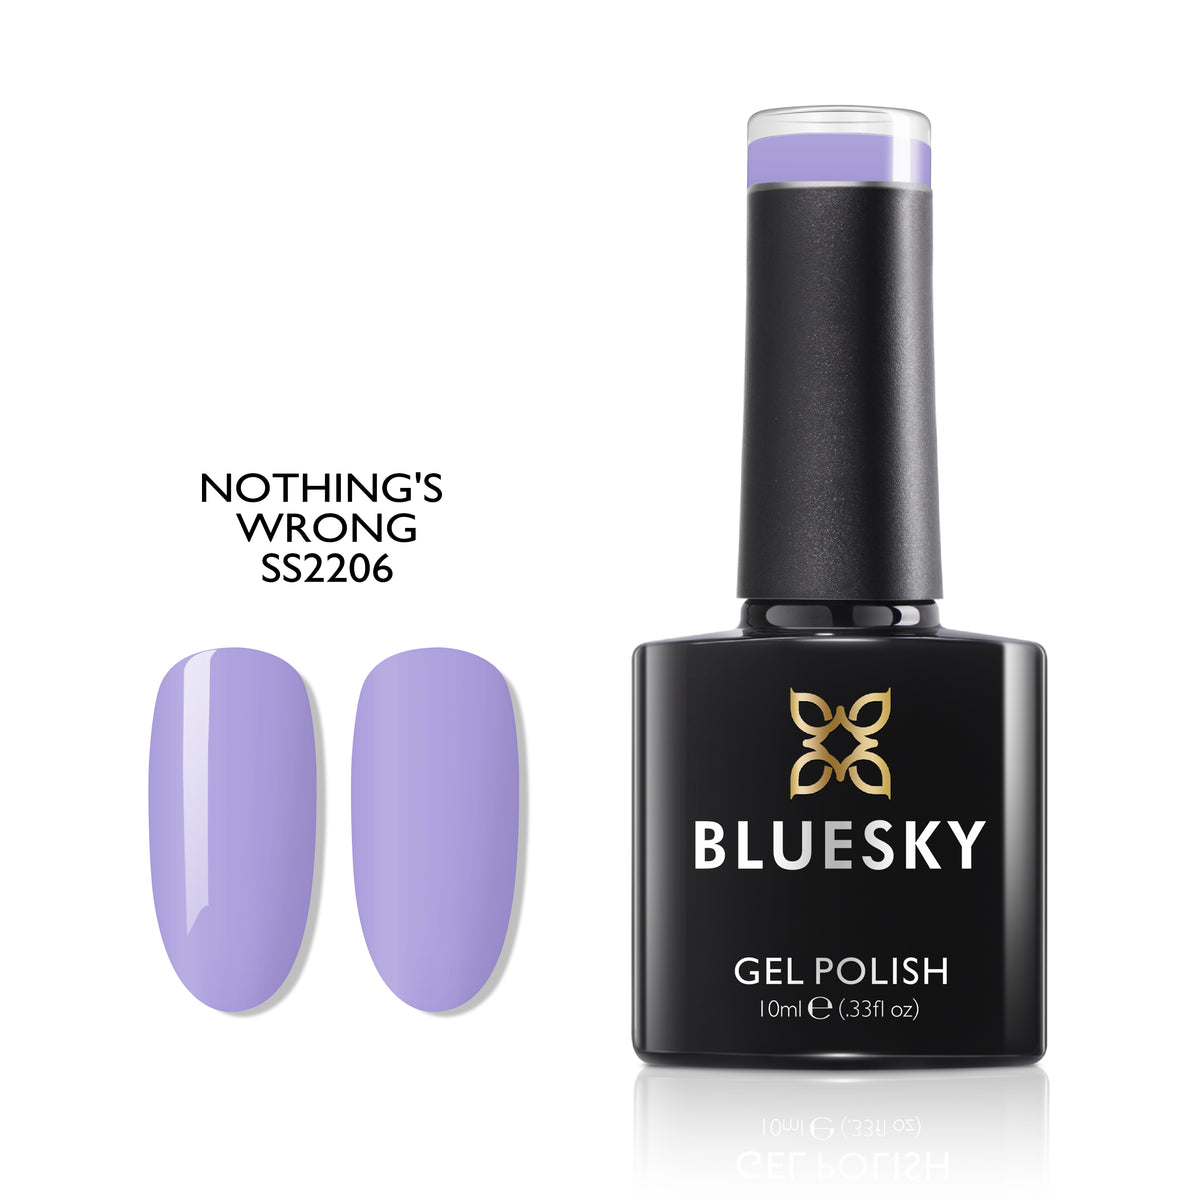 Bluesky Gel Polish-Nothing's Wrong SS 2206